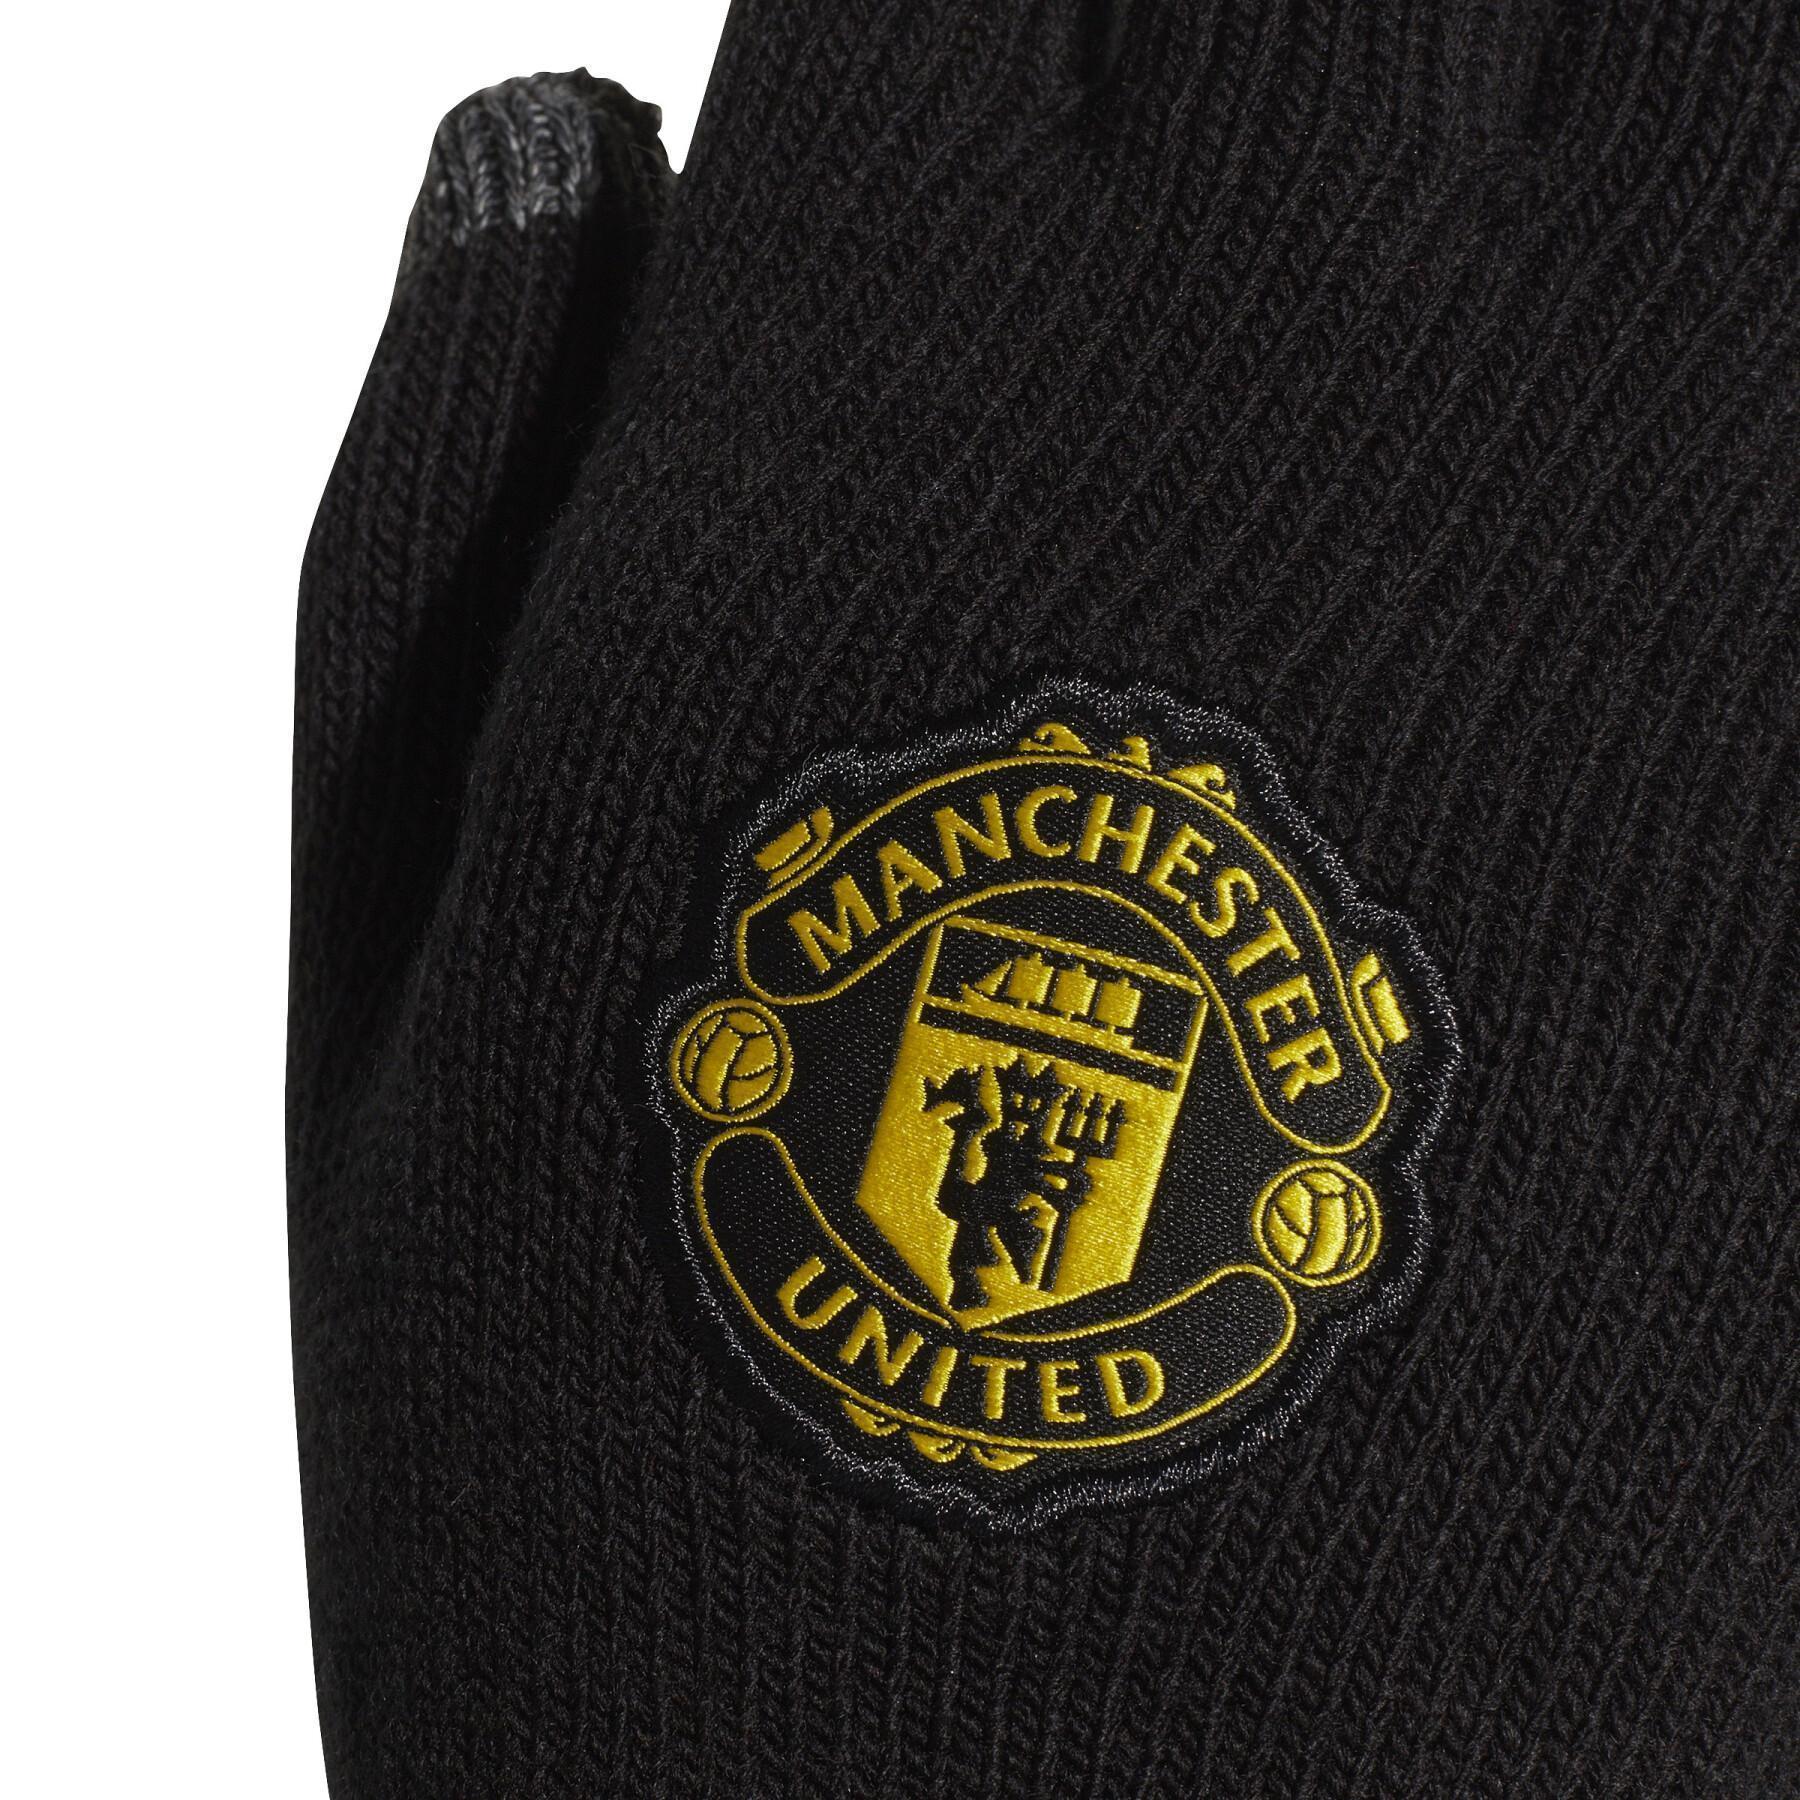 Guantes Manchester United